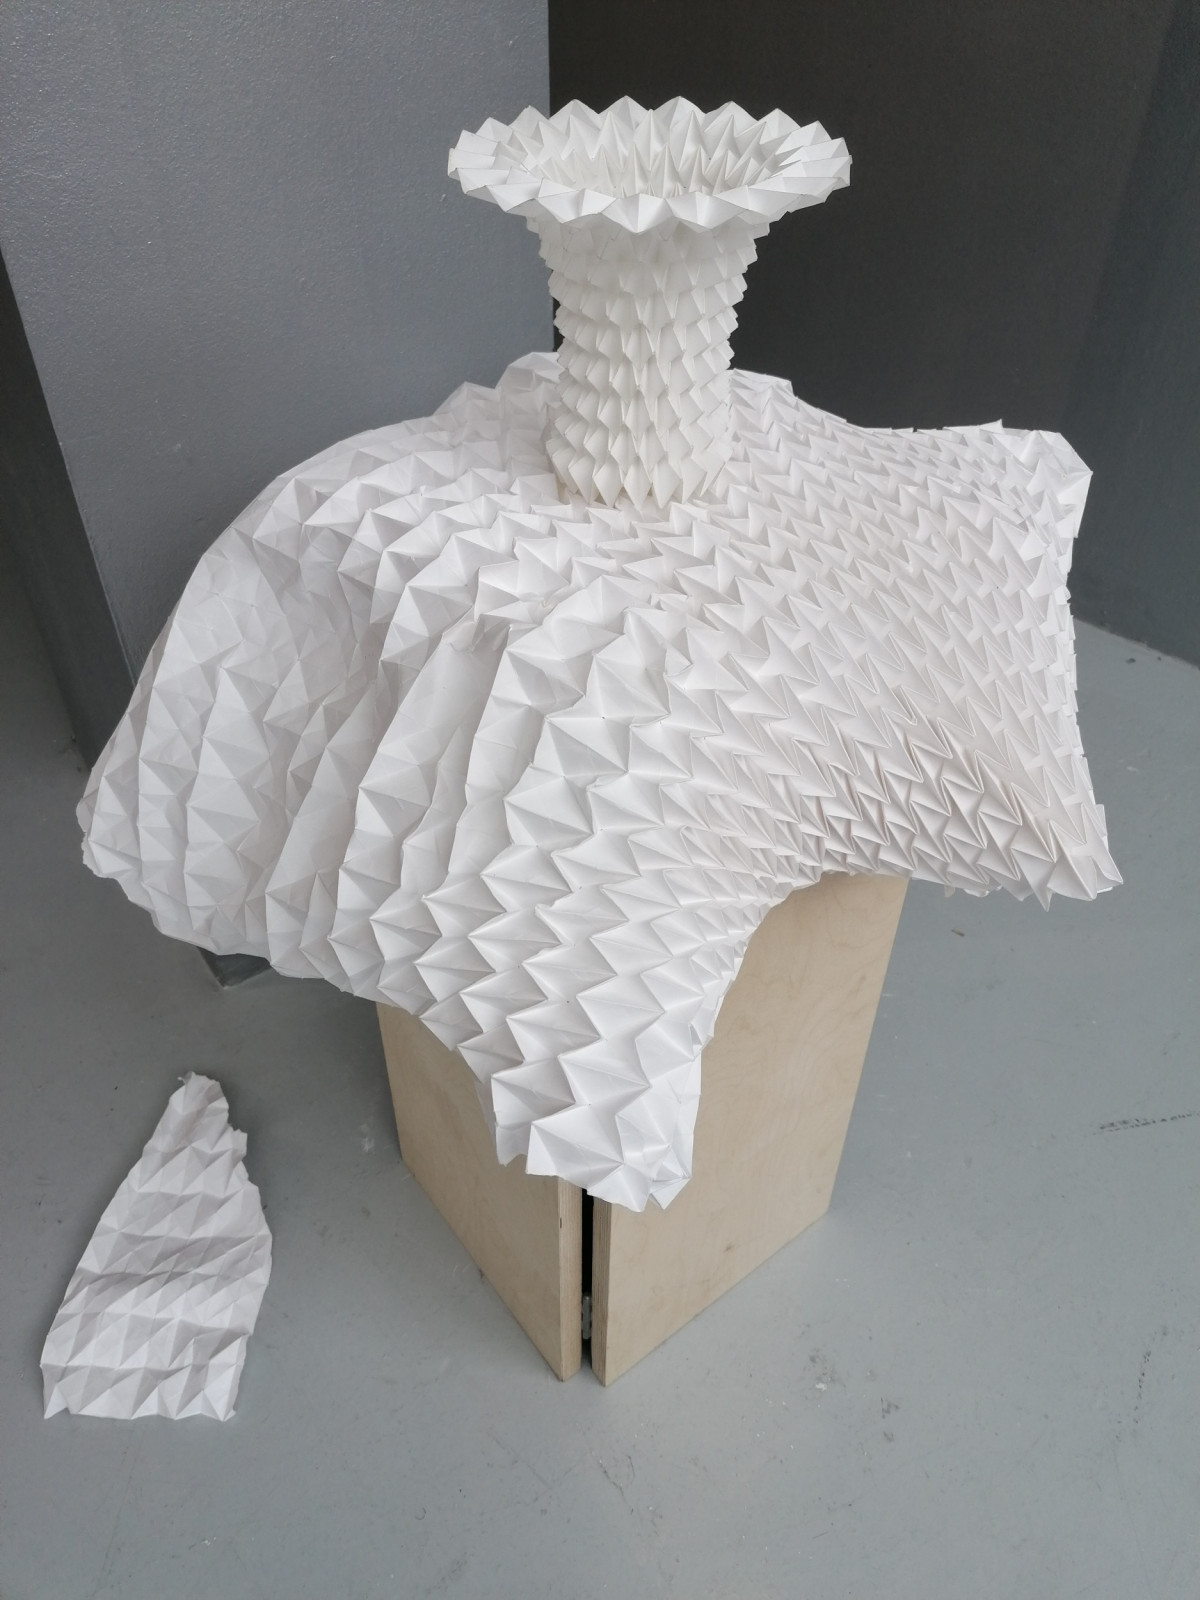 'The Origami of Being', NCAD Gallery